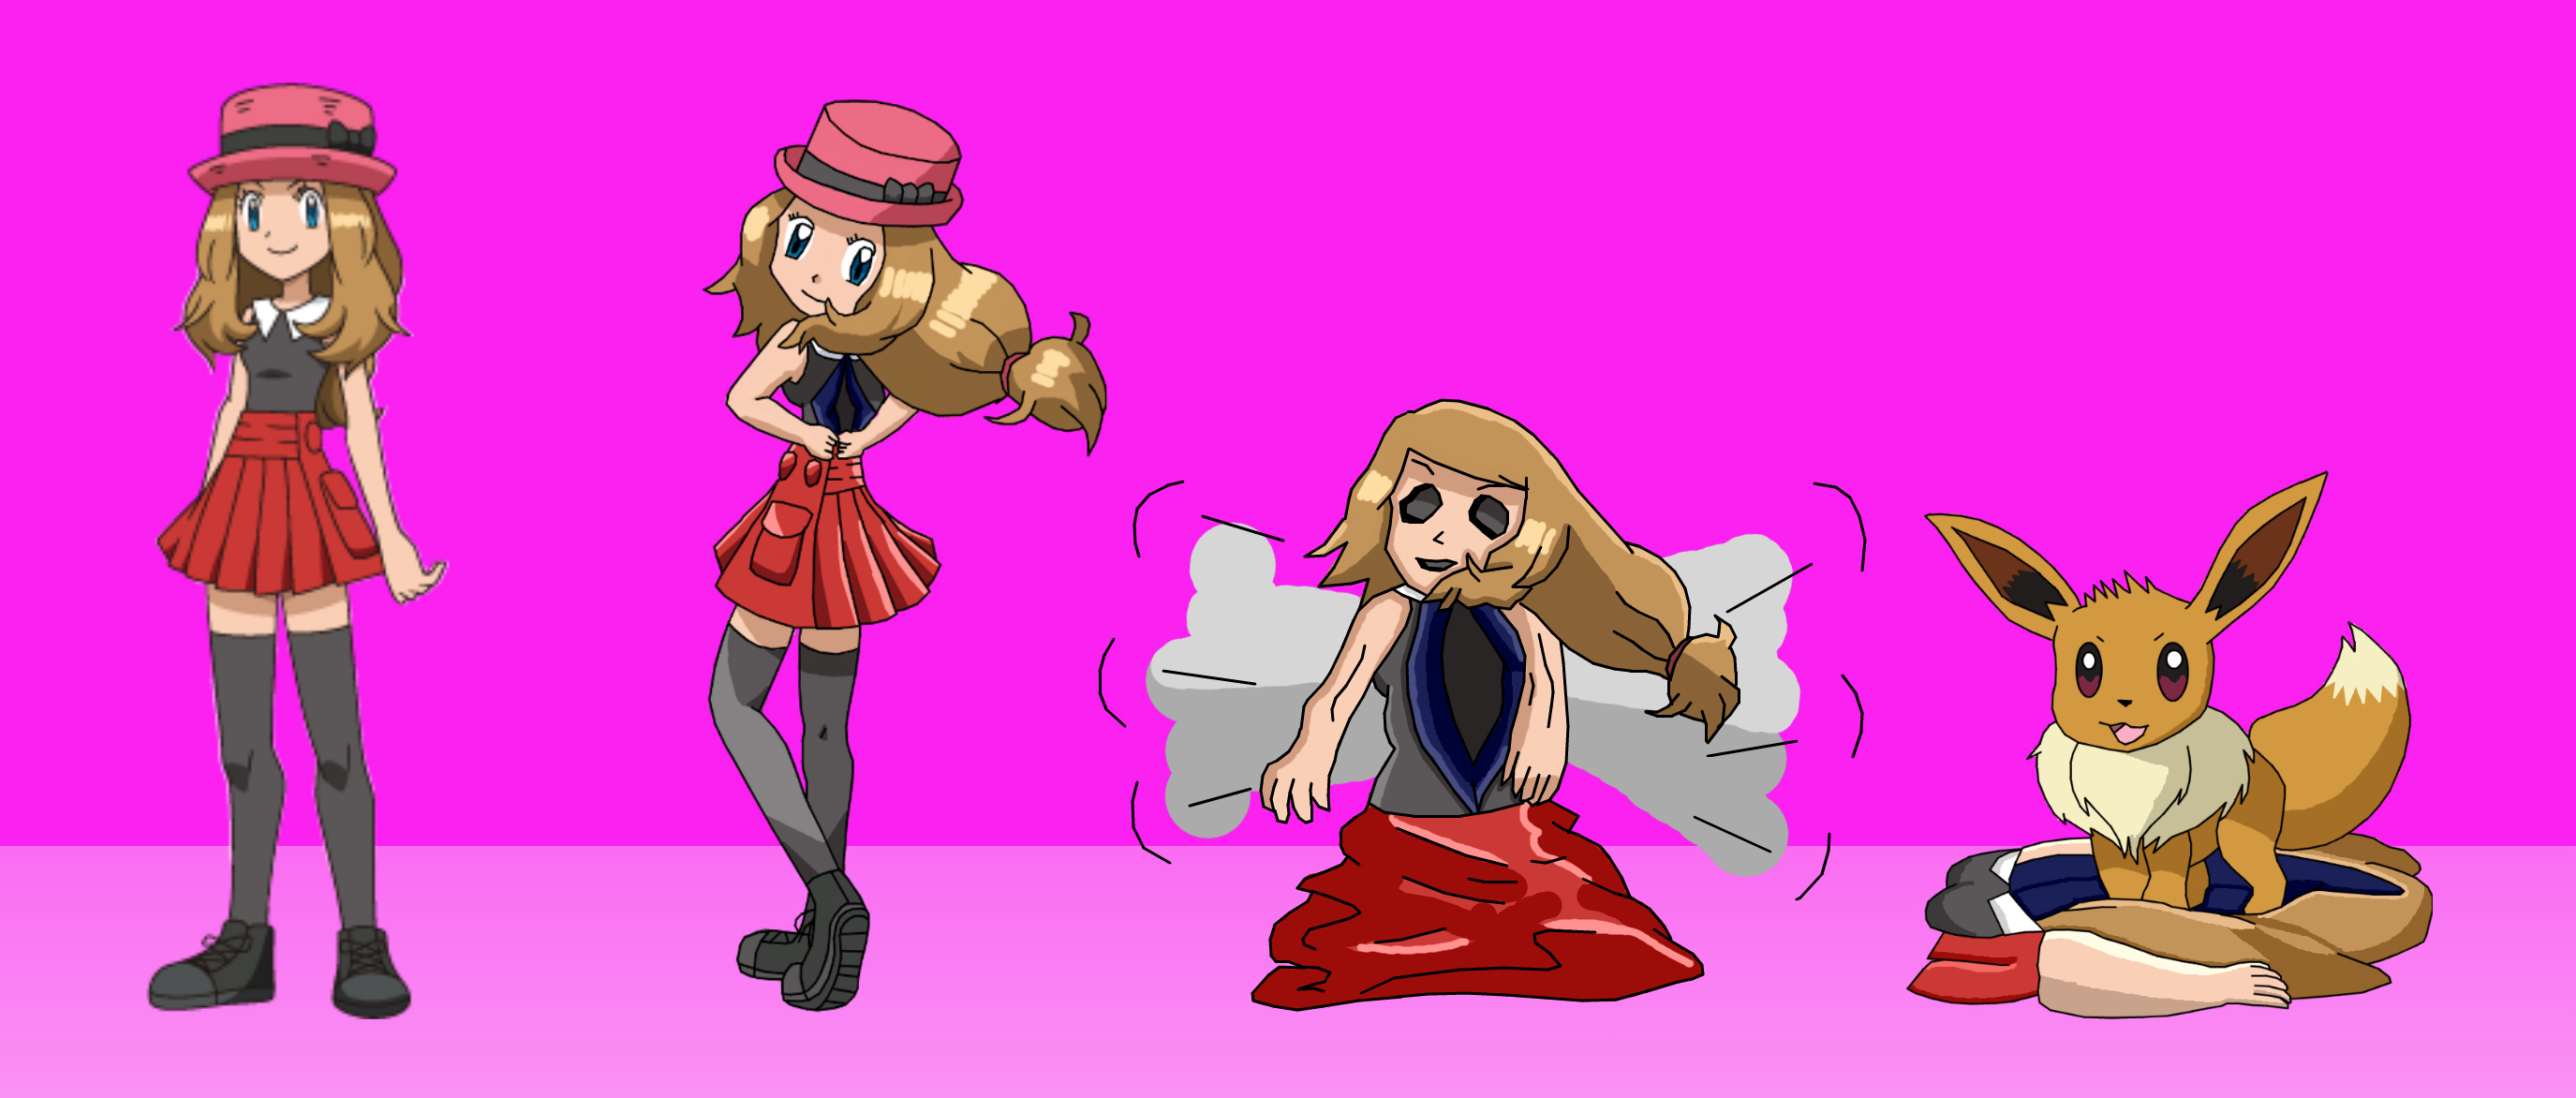 Serena soul Eevee and XY by Bc320903871 on DeviantArt